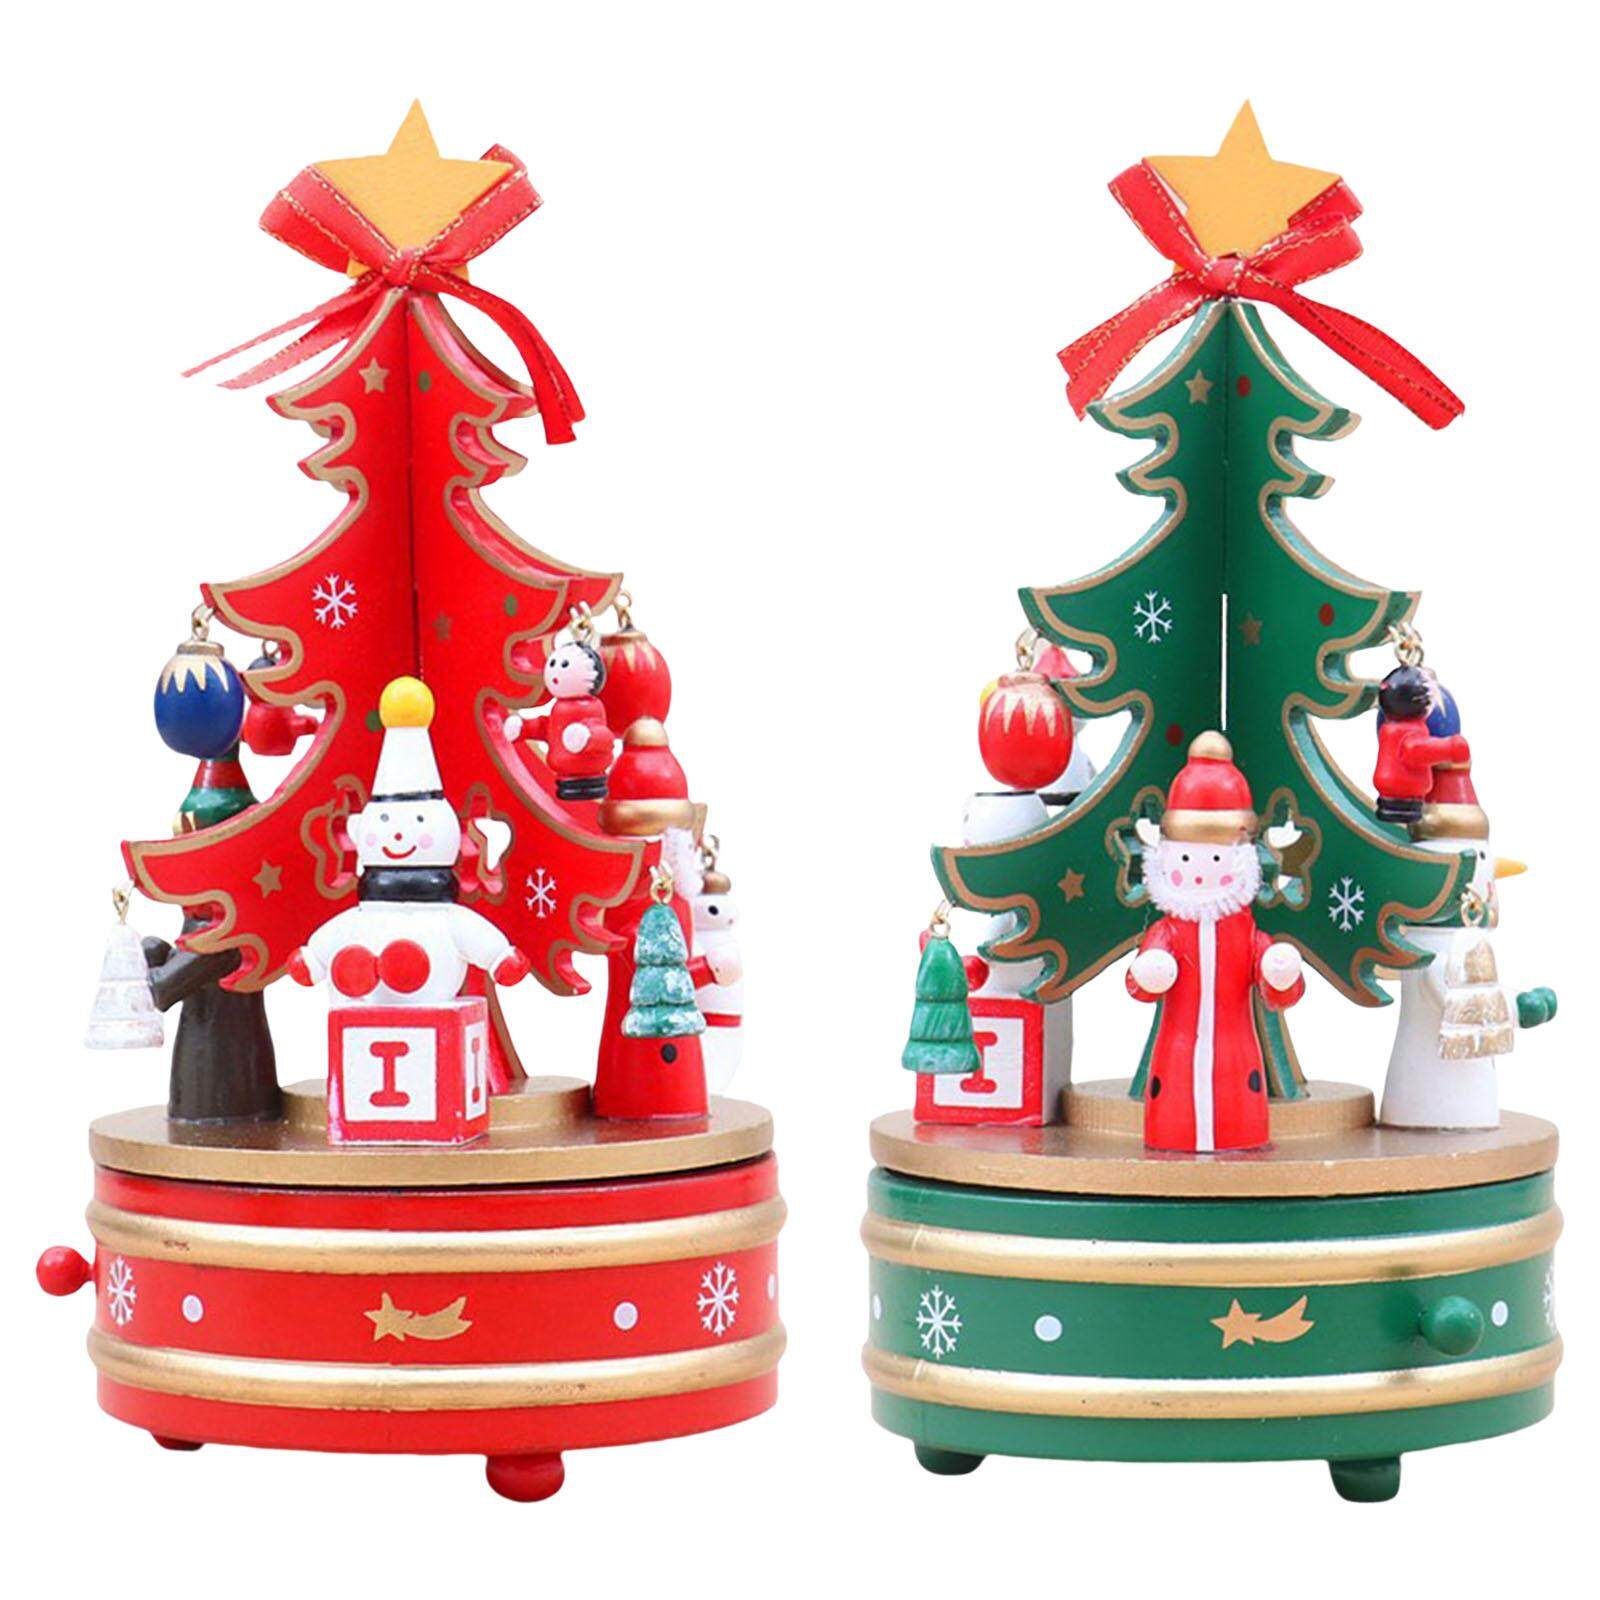 Portable Music Box Rotatable Wood Musical Box Carousel Decoration Toy For